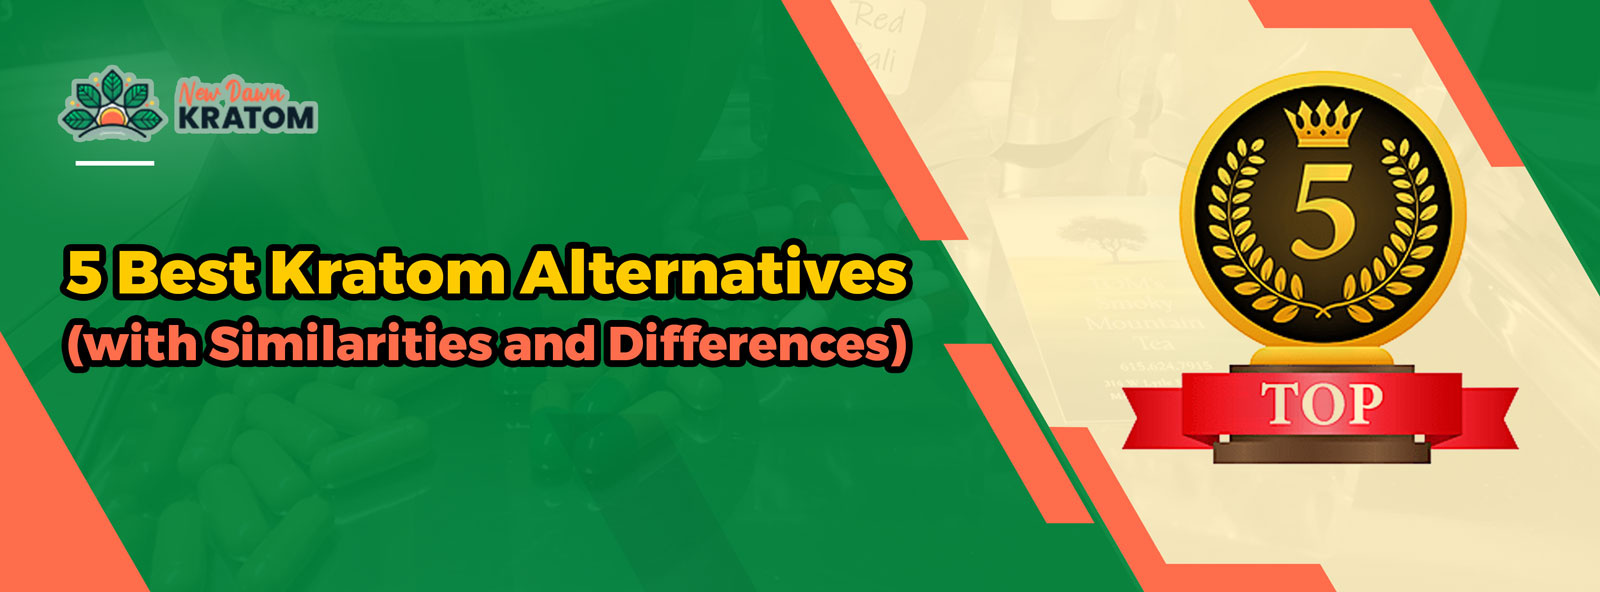 5 Best Kratom Alternatives (with Similarities and Differences)